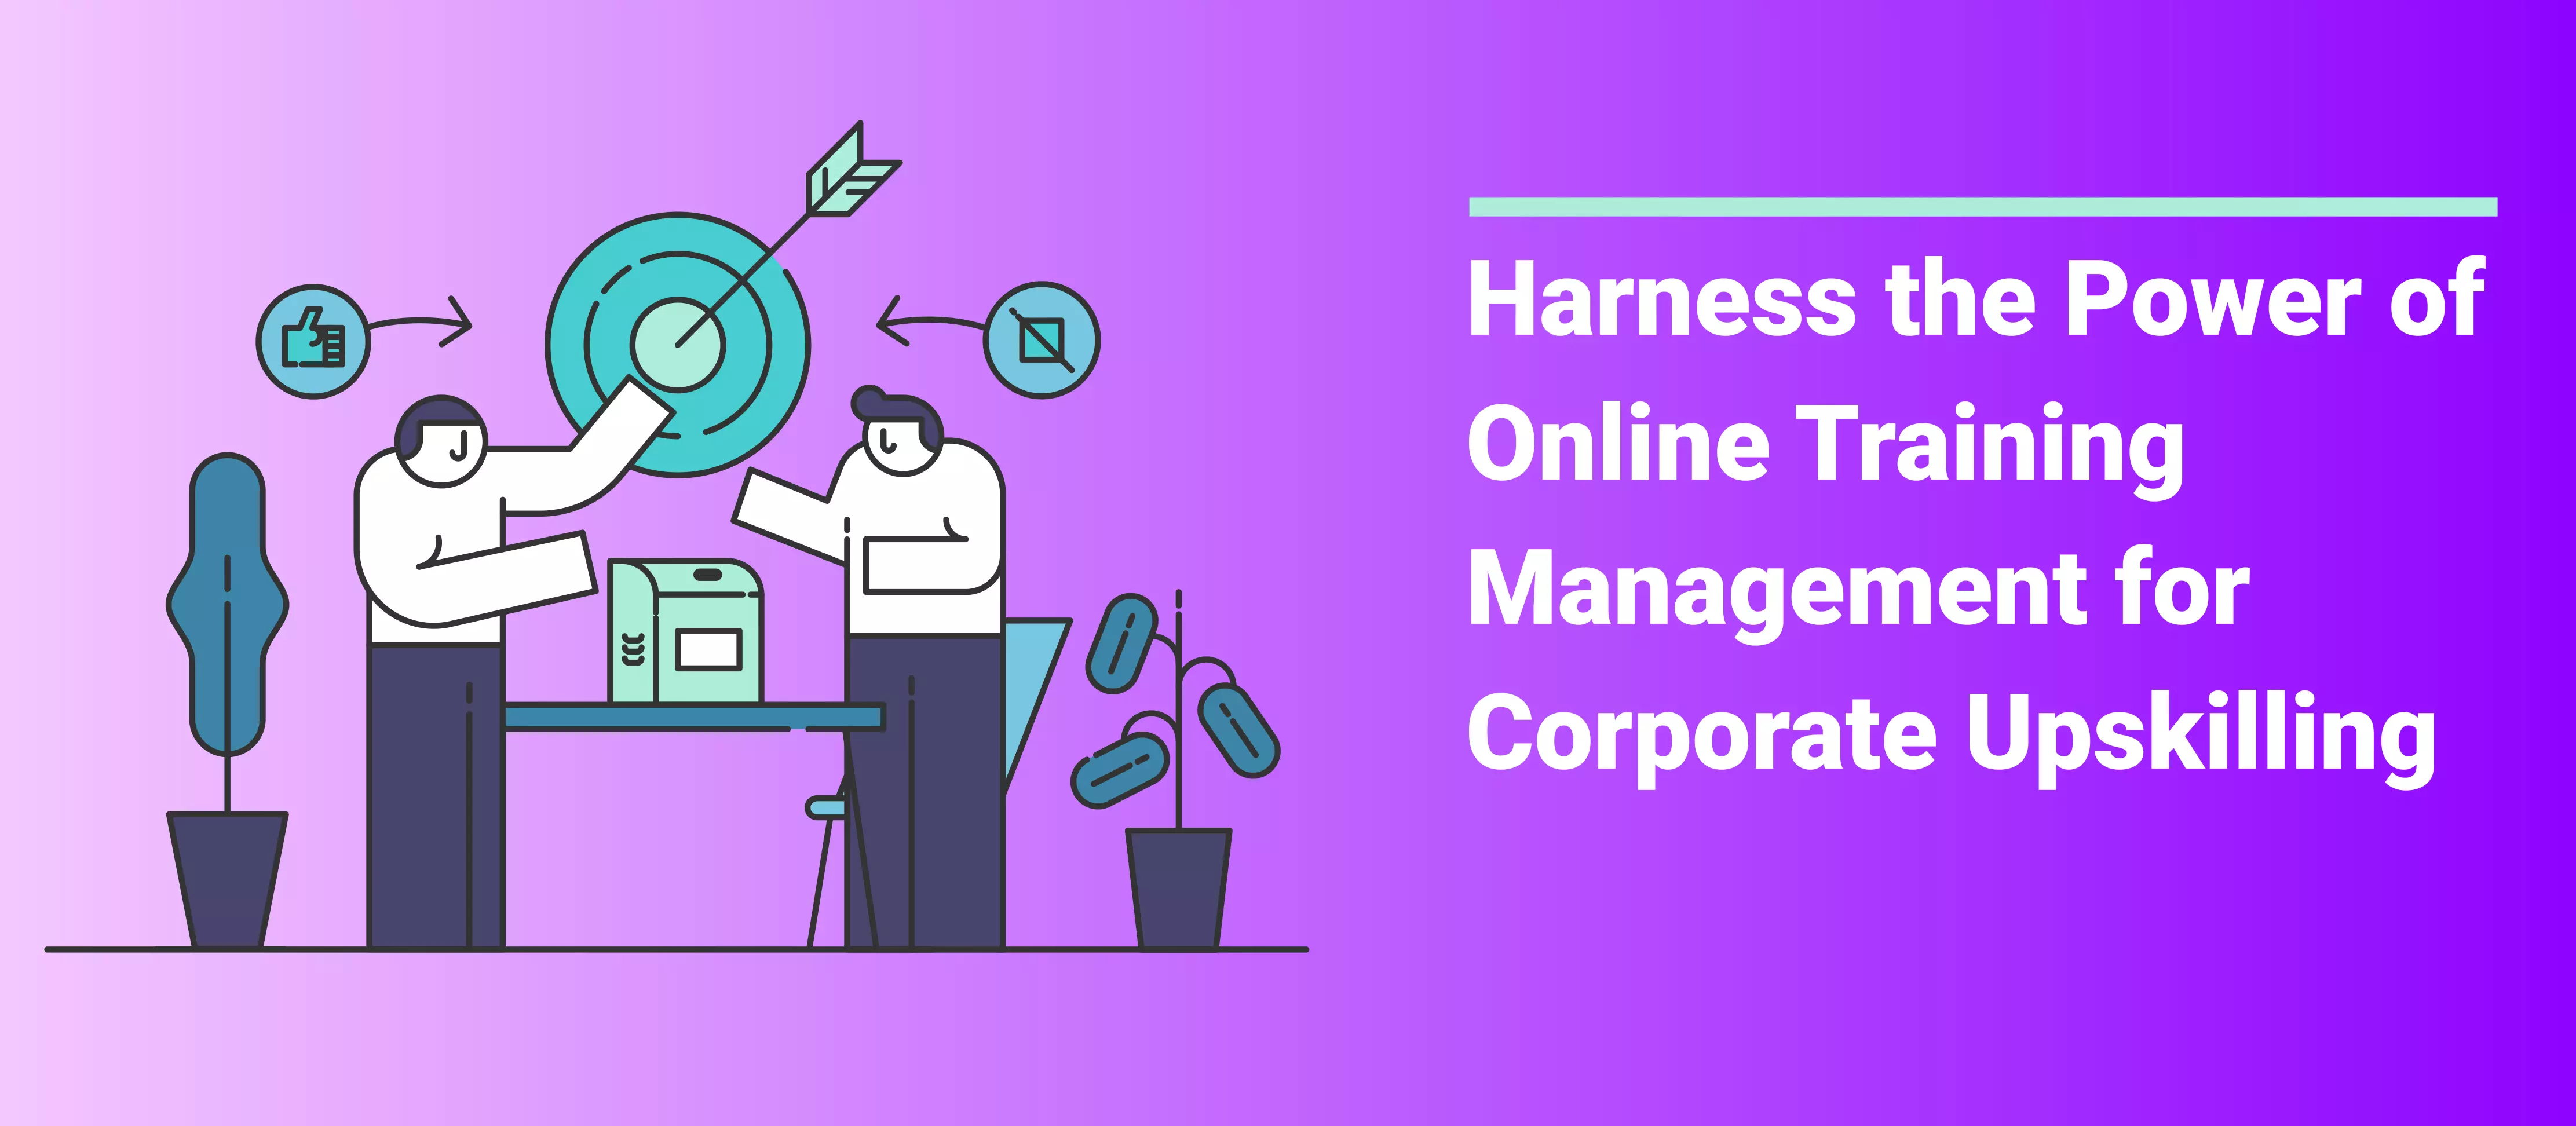 How Online Training Management Helps Corporates Upskill Their Employees